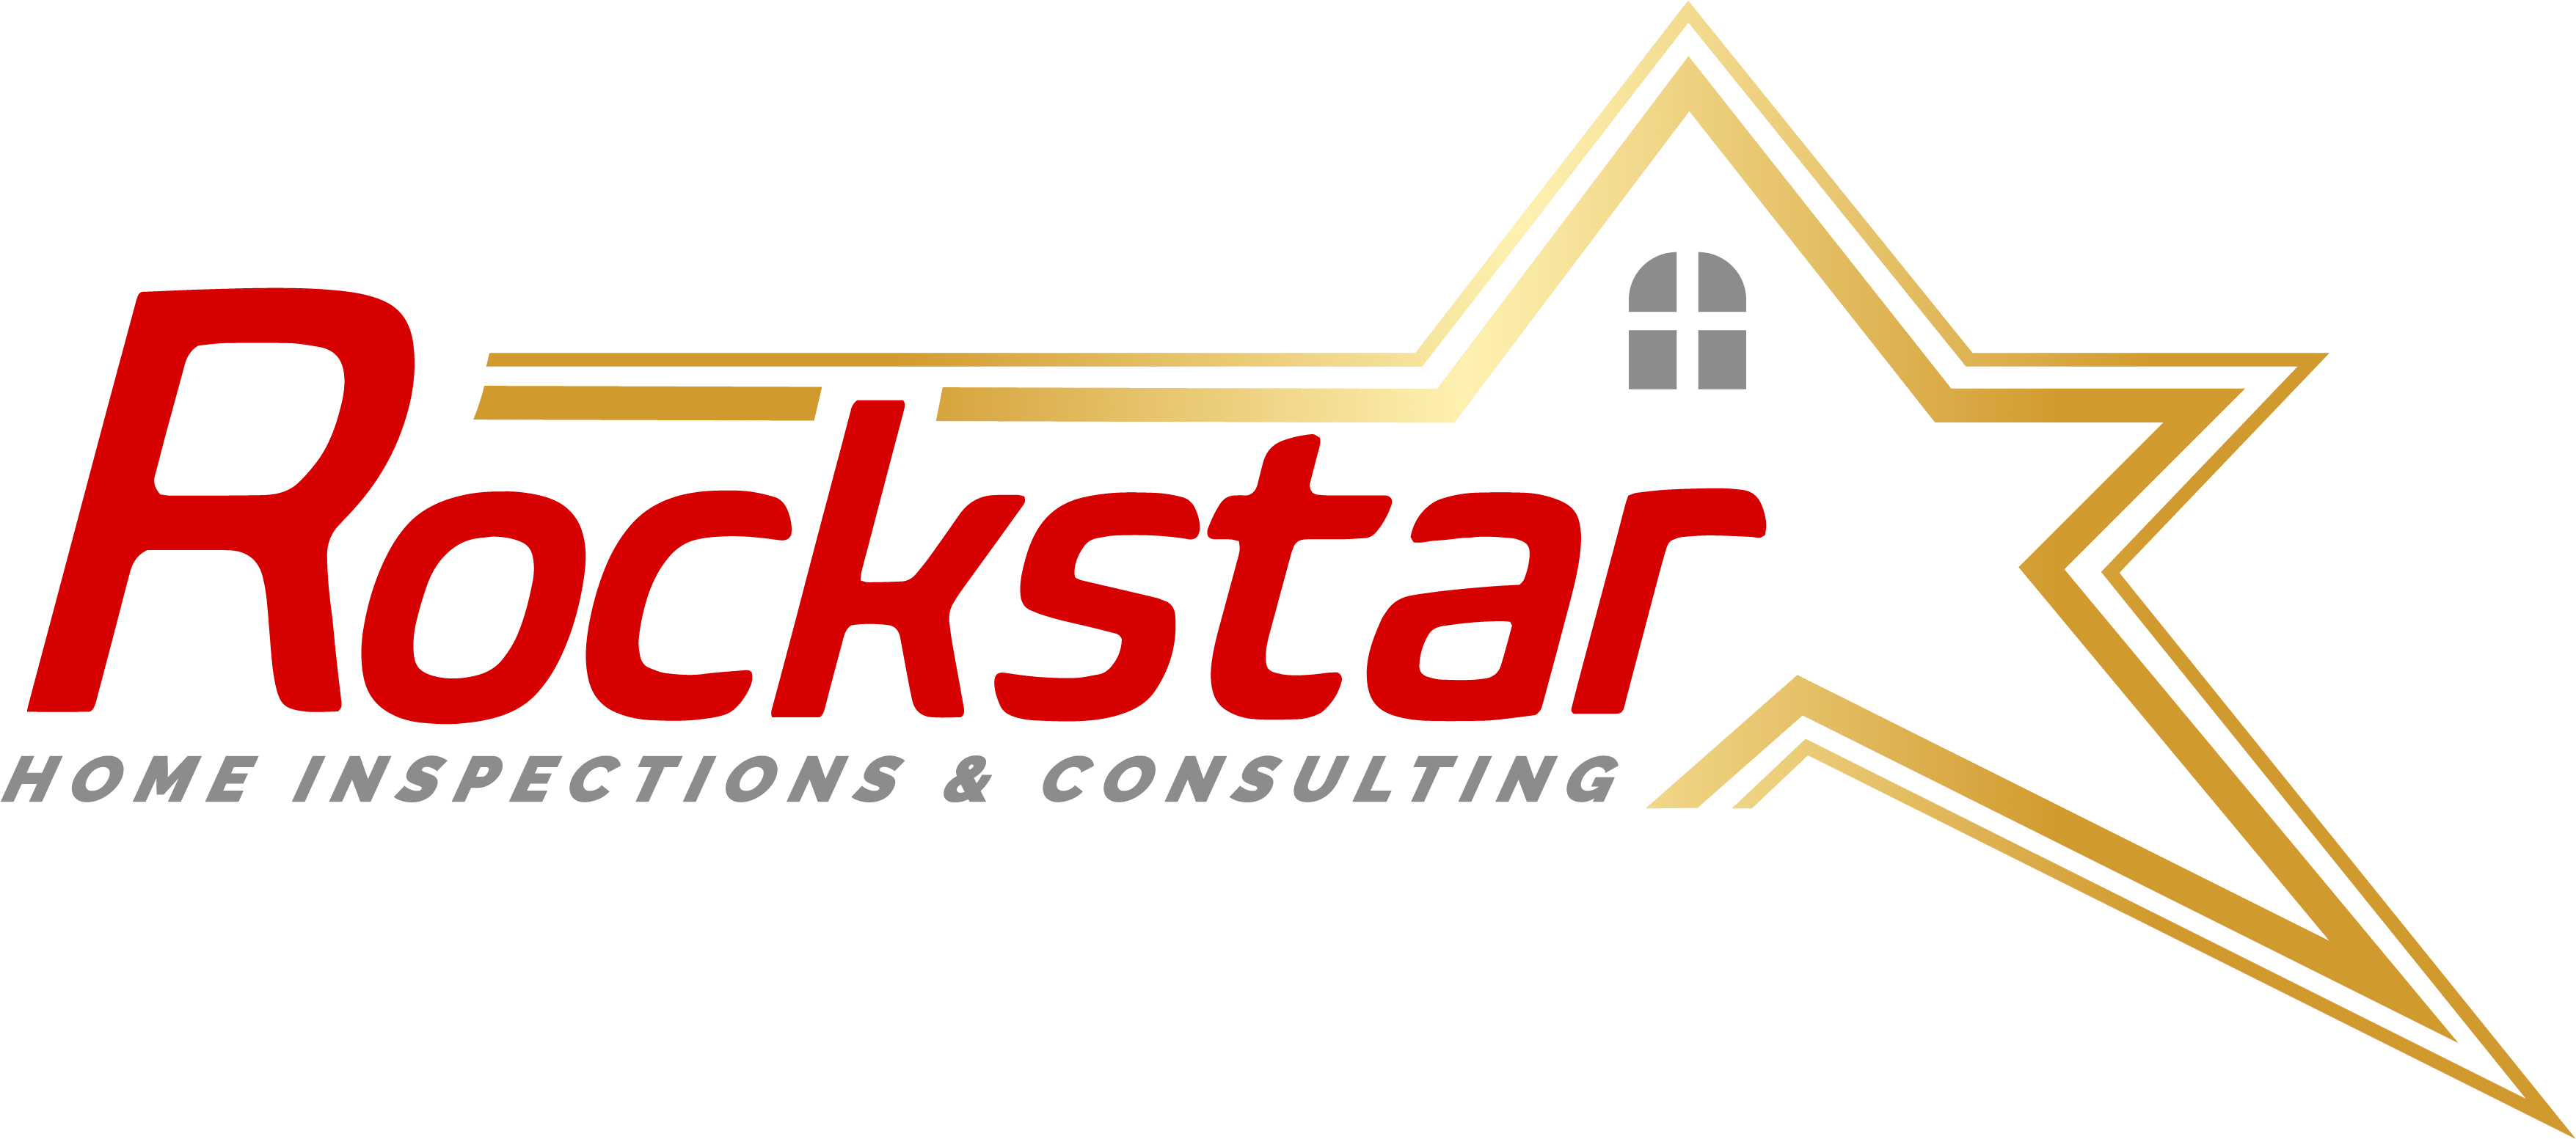 Rockstar Home Inspections & Consulting Logo